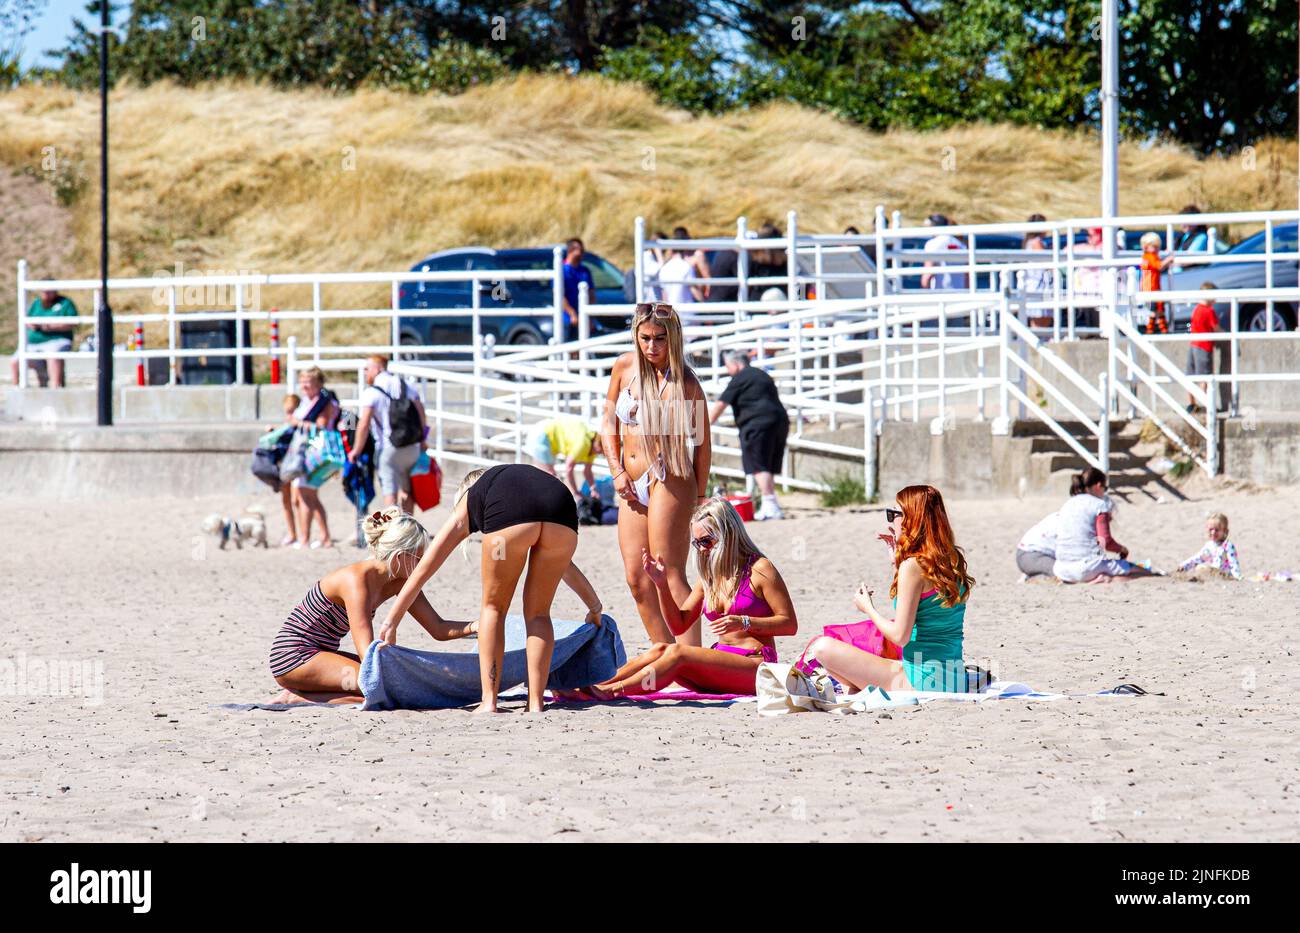 Dundee, Tayside, Scotland, UK. 11th Aug, 2022. UK weather: Extremely hot August temperatures in North East Scotland reached 28°C. Visitors swarm to Broughty Ferry beach in Dundee to enjoy the warm, wonderful summer weather and sunbathe on the sand. Stunning woman enjoying themselves while being photographed sunbathing. Credit: Dundee Photographics/Alamy Live News Stock Photo